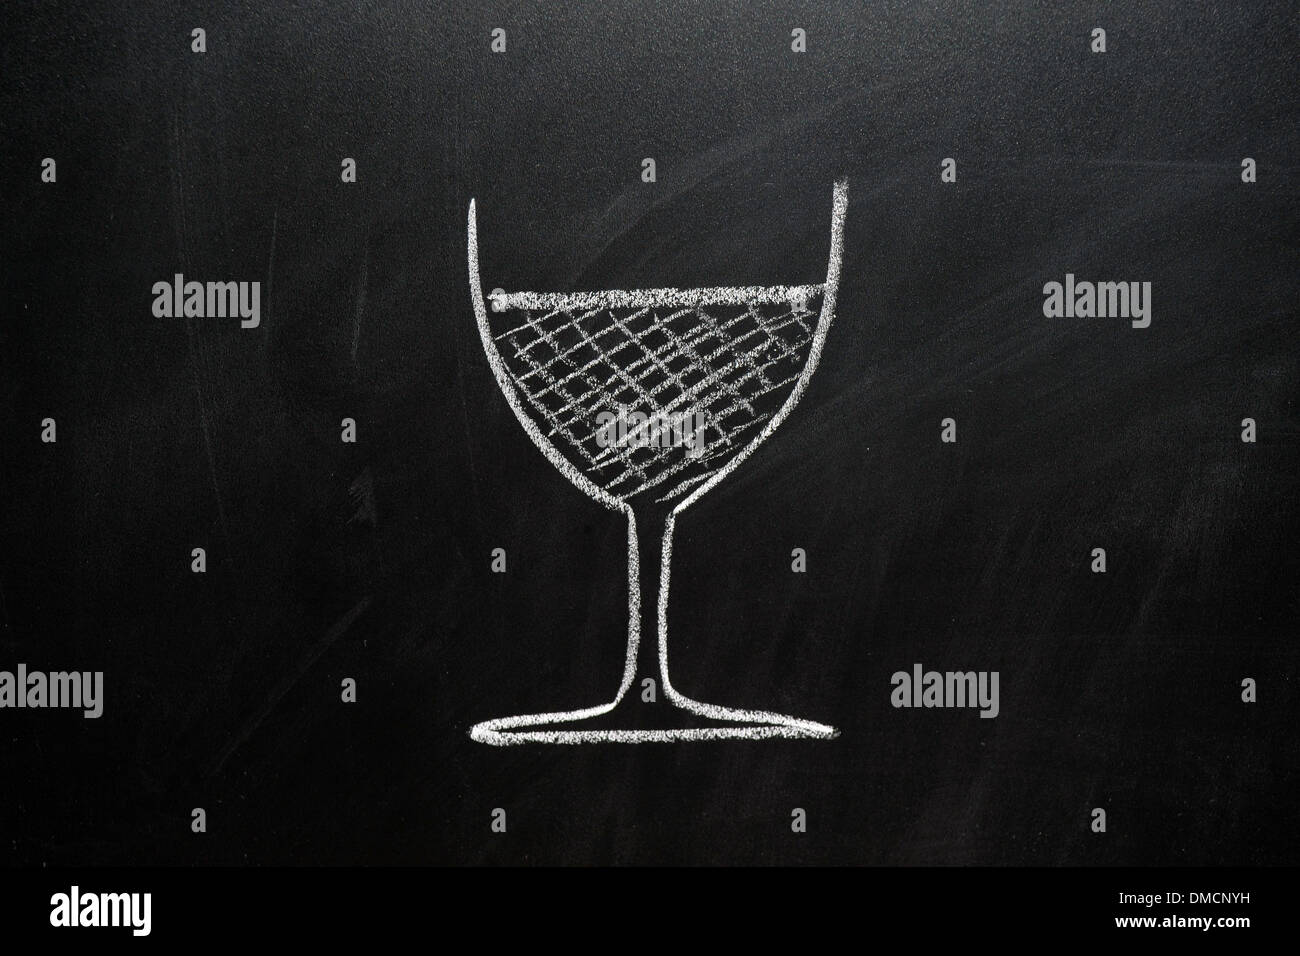 A picture of a glass of wine drawn on a blackboard in white chalk. Stock Photo